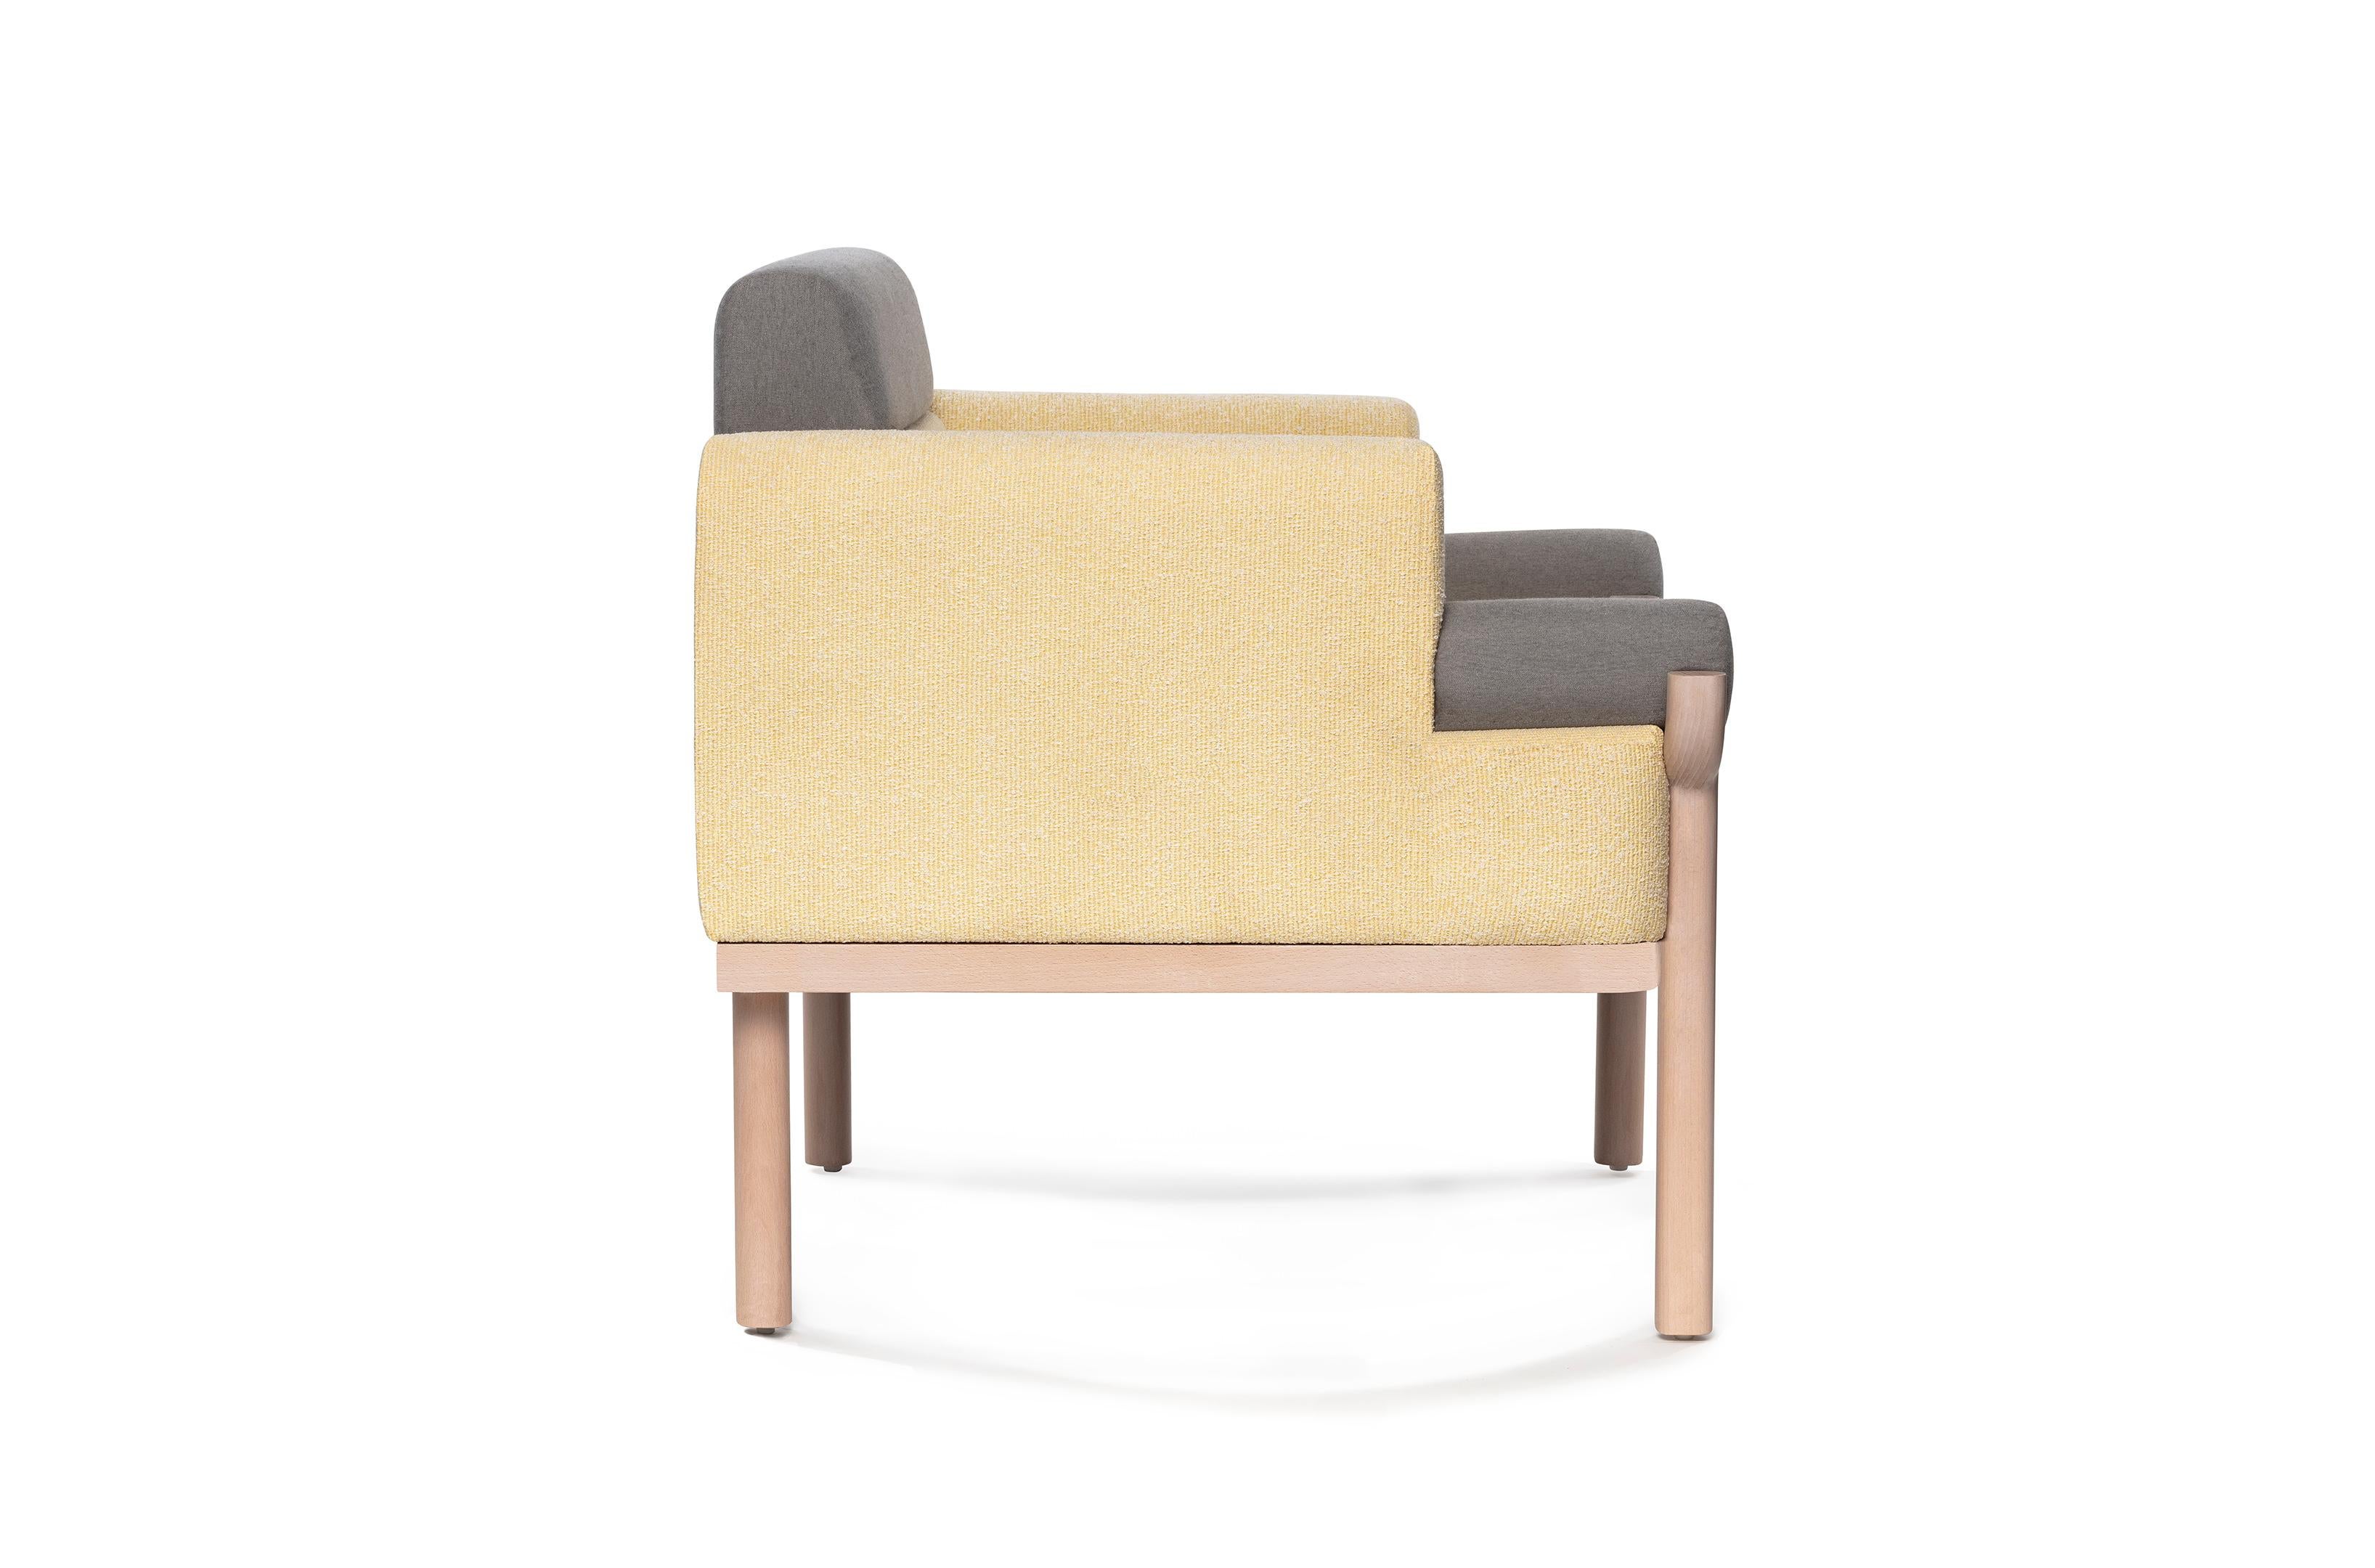 Add a little statement like this armchair to your living room or office. The Youban armchair features long legs with a round top that supports the design of the armrest. Unique textures and pastel colors blend to give you an exquisite design. Also